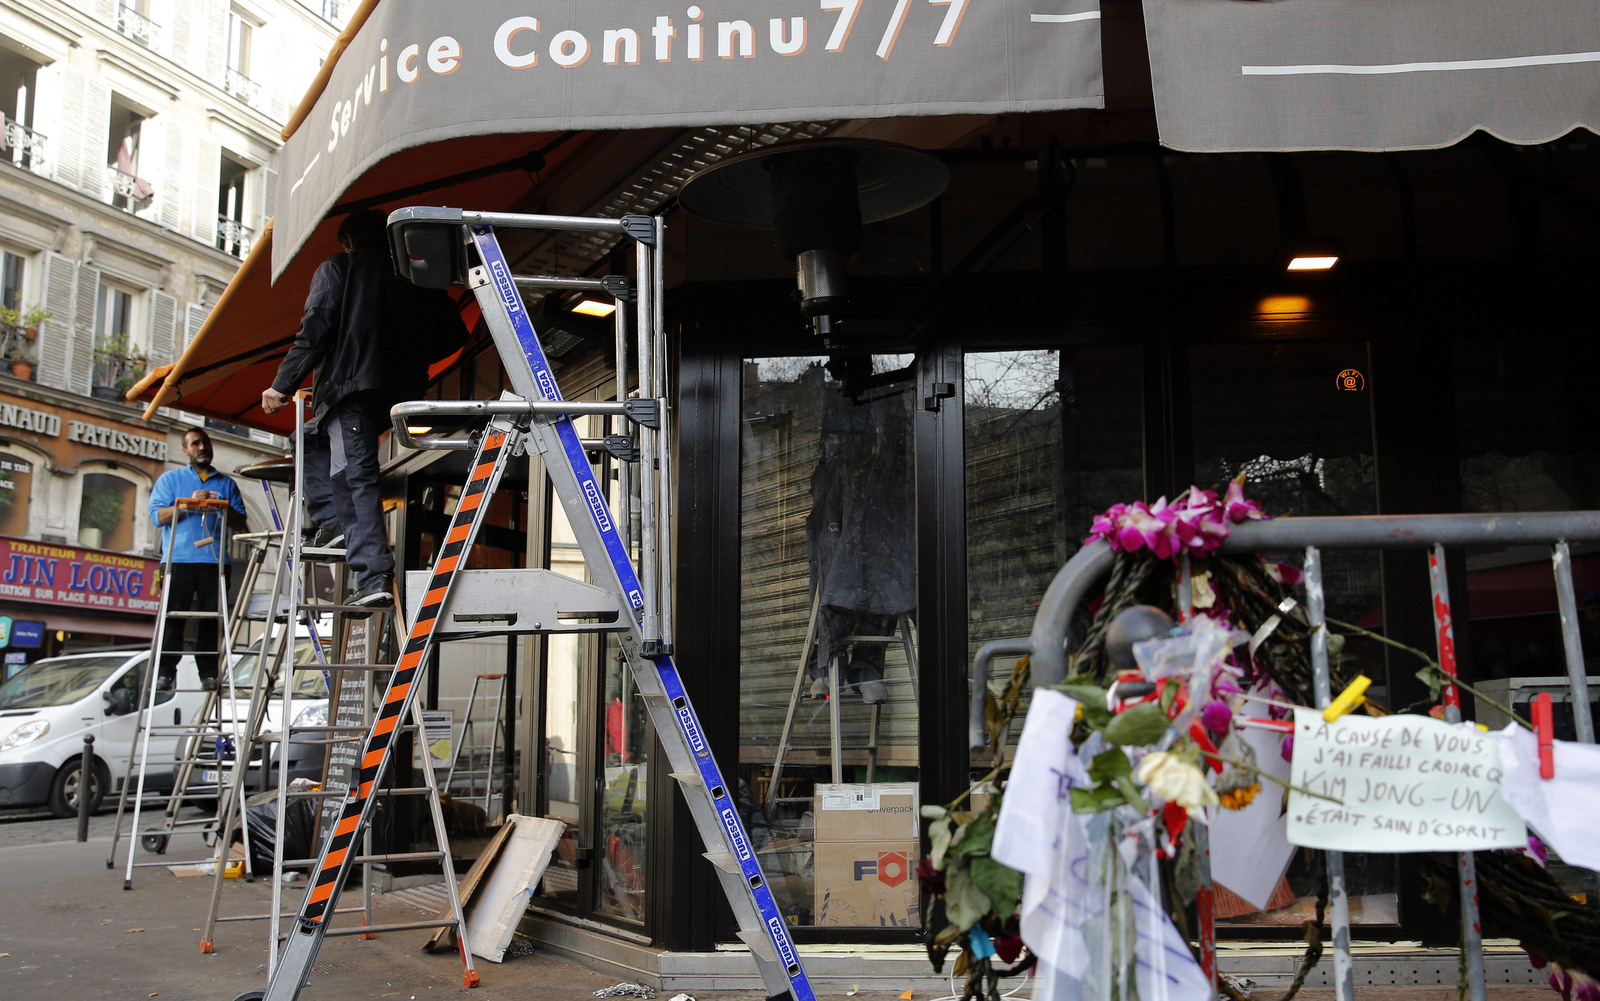 Men work on the shop front of the cafe "La bonne biere", one of the establishments targeted during the November Paris attacks, in Paris, Thursday, Dec. 3, 2015 . The cafe is expected to reopen Friday, Dec. 4. (AP Photo/Christophe Ena)